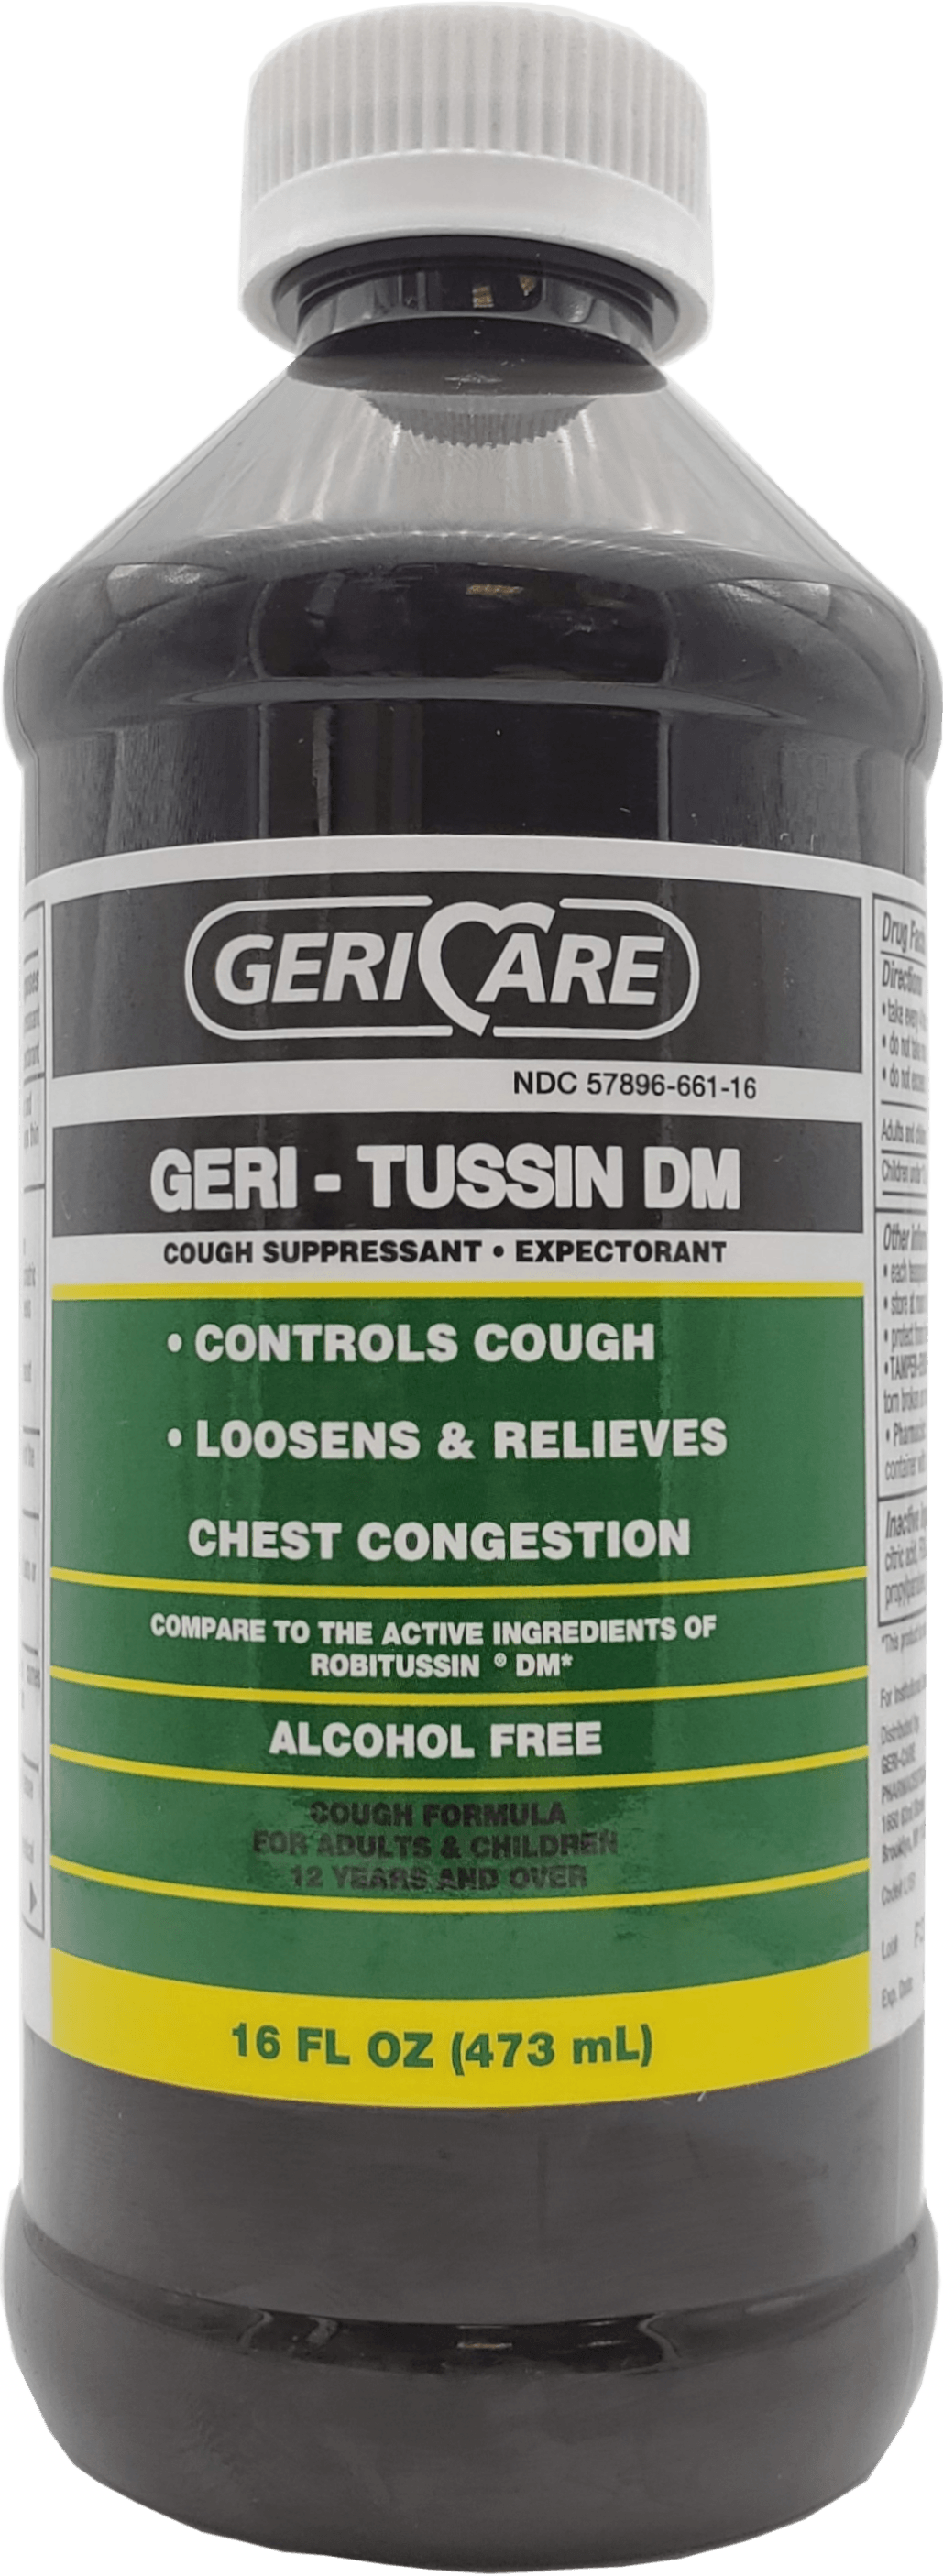 Geri-Tussin DM Cold and Cough Relief, 16oz Bottle